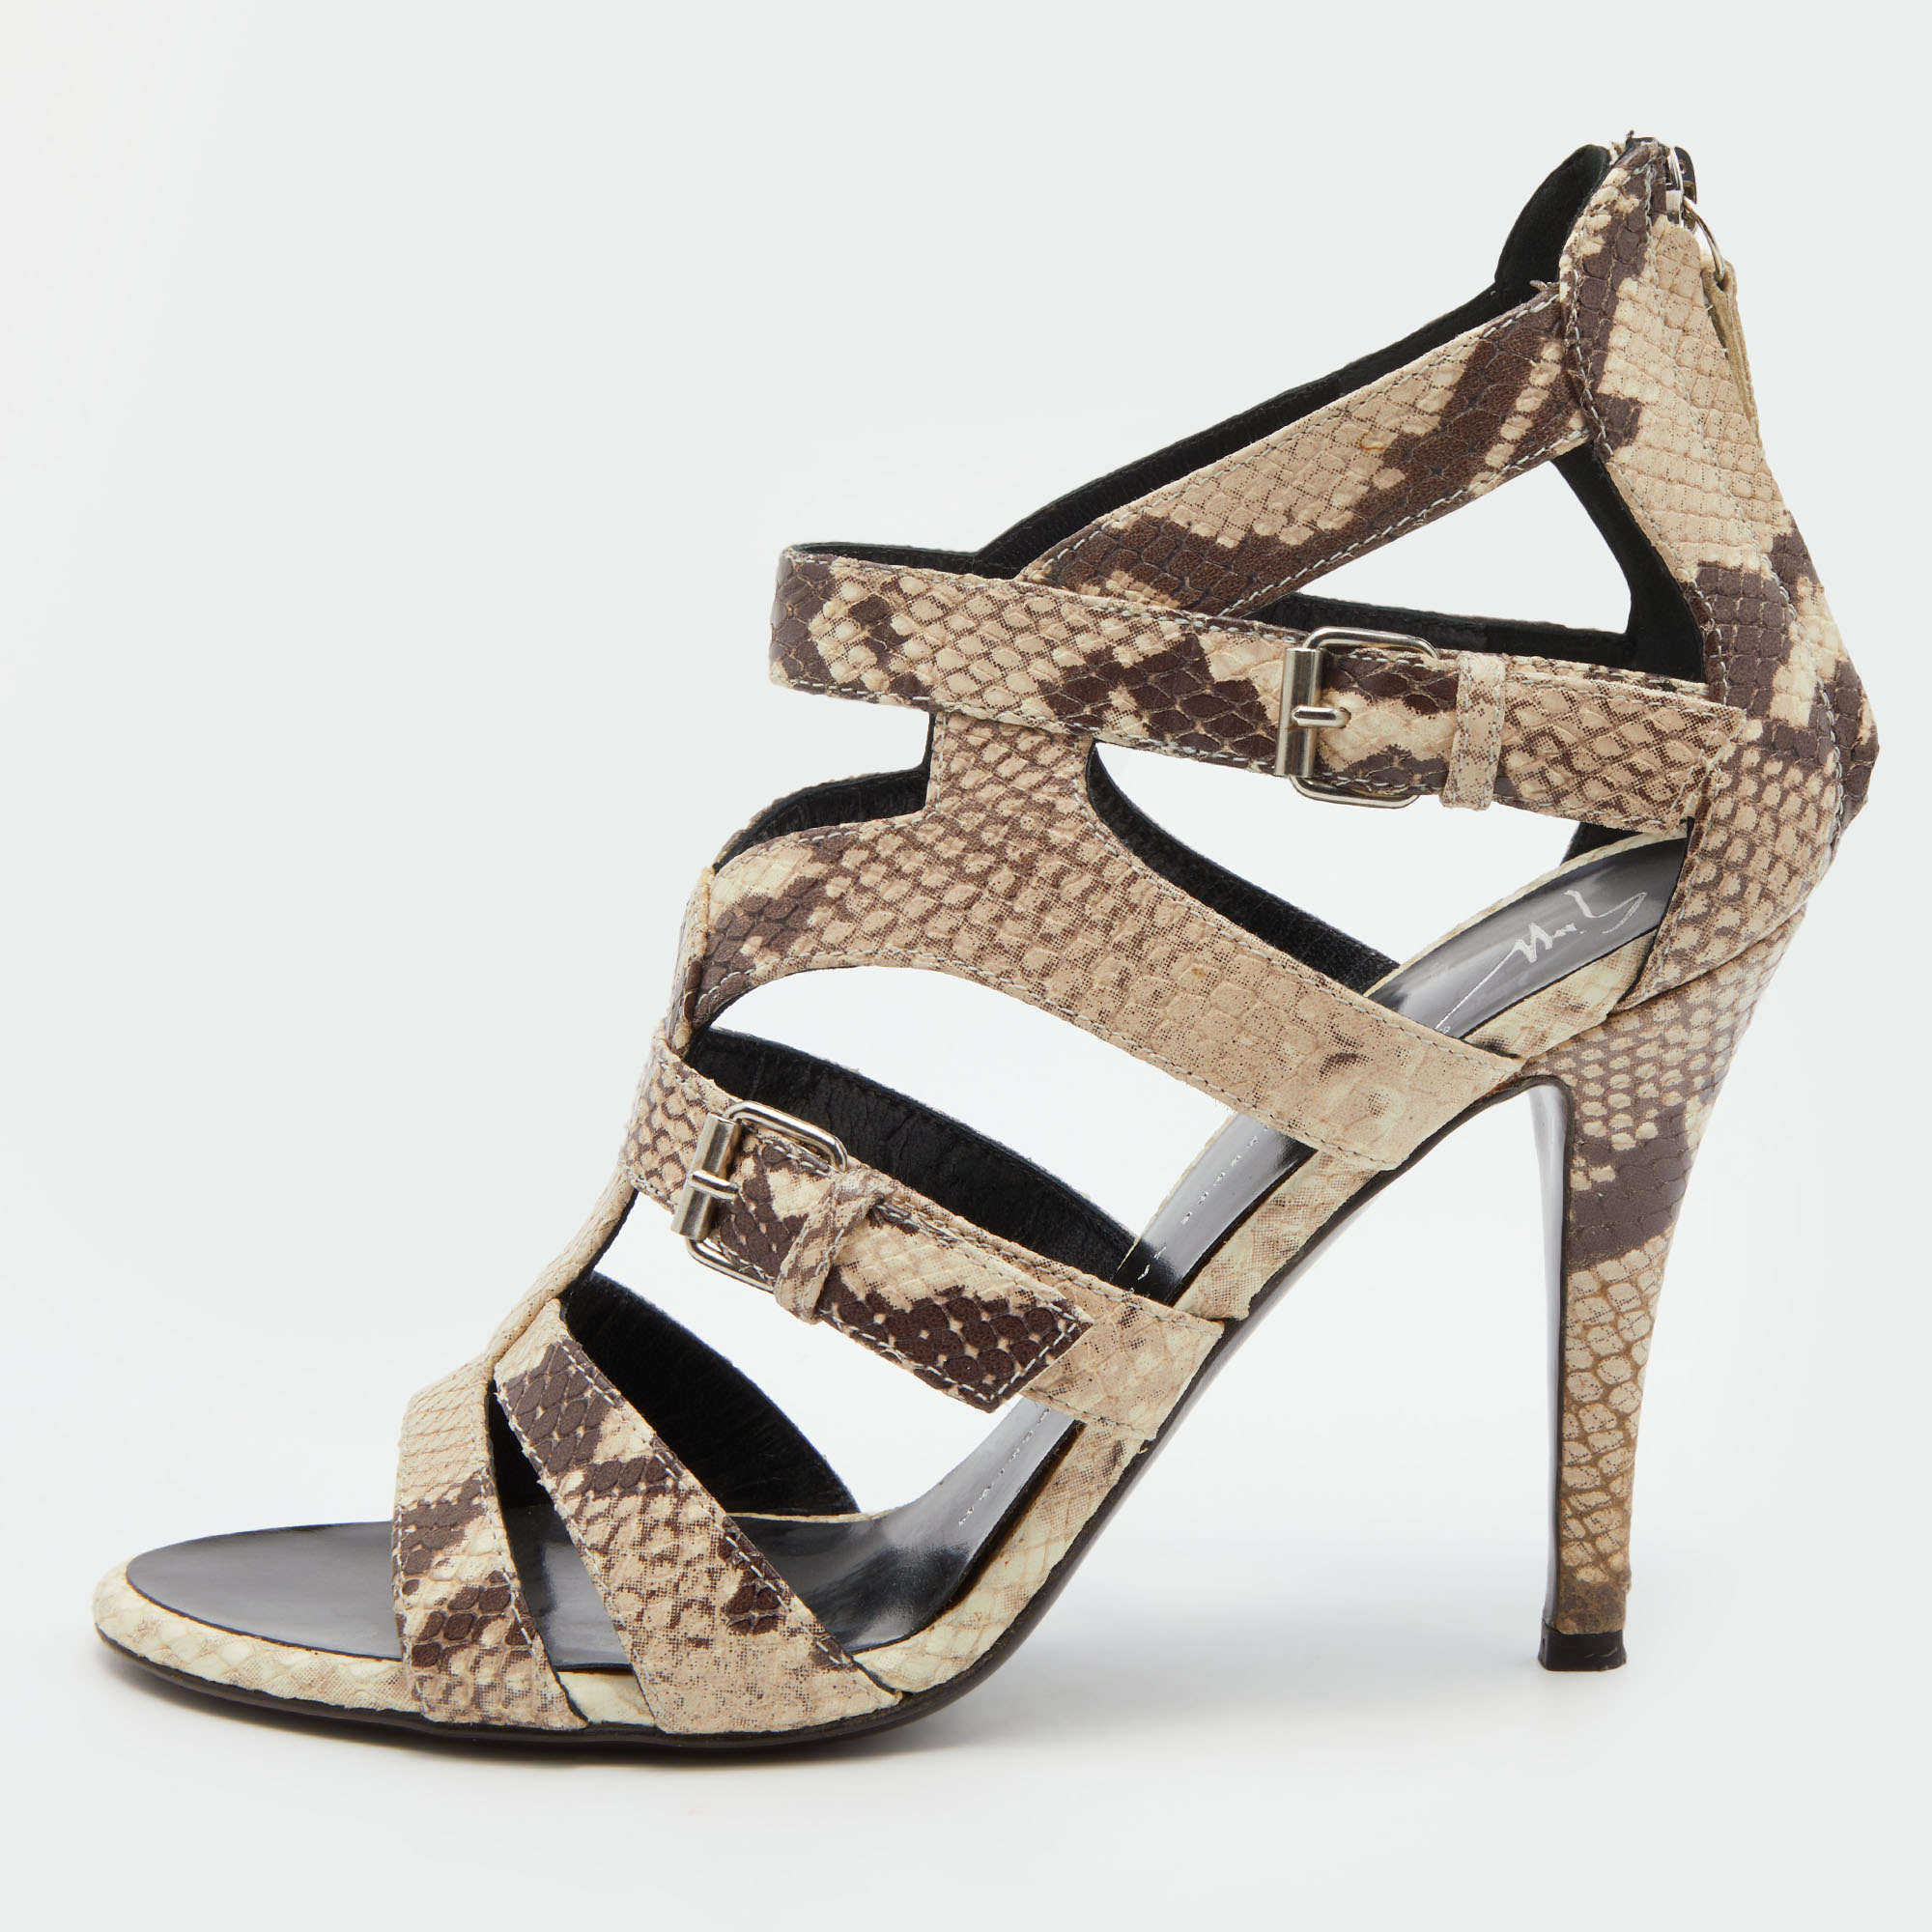 Pre-owned Giuseppe Zanotti Off White/brown Python Embossed Leather Strappy Sandals Size 38